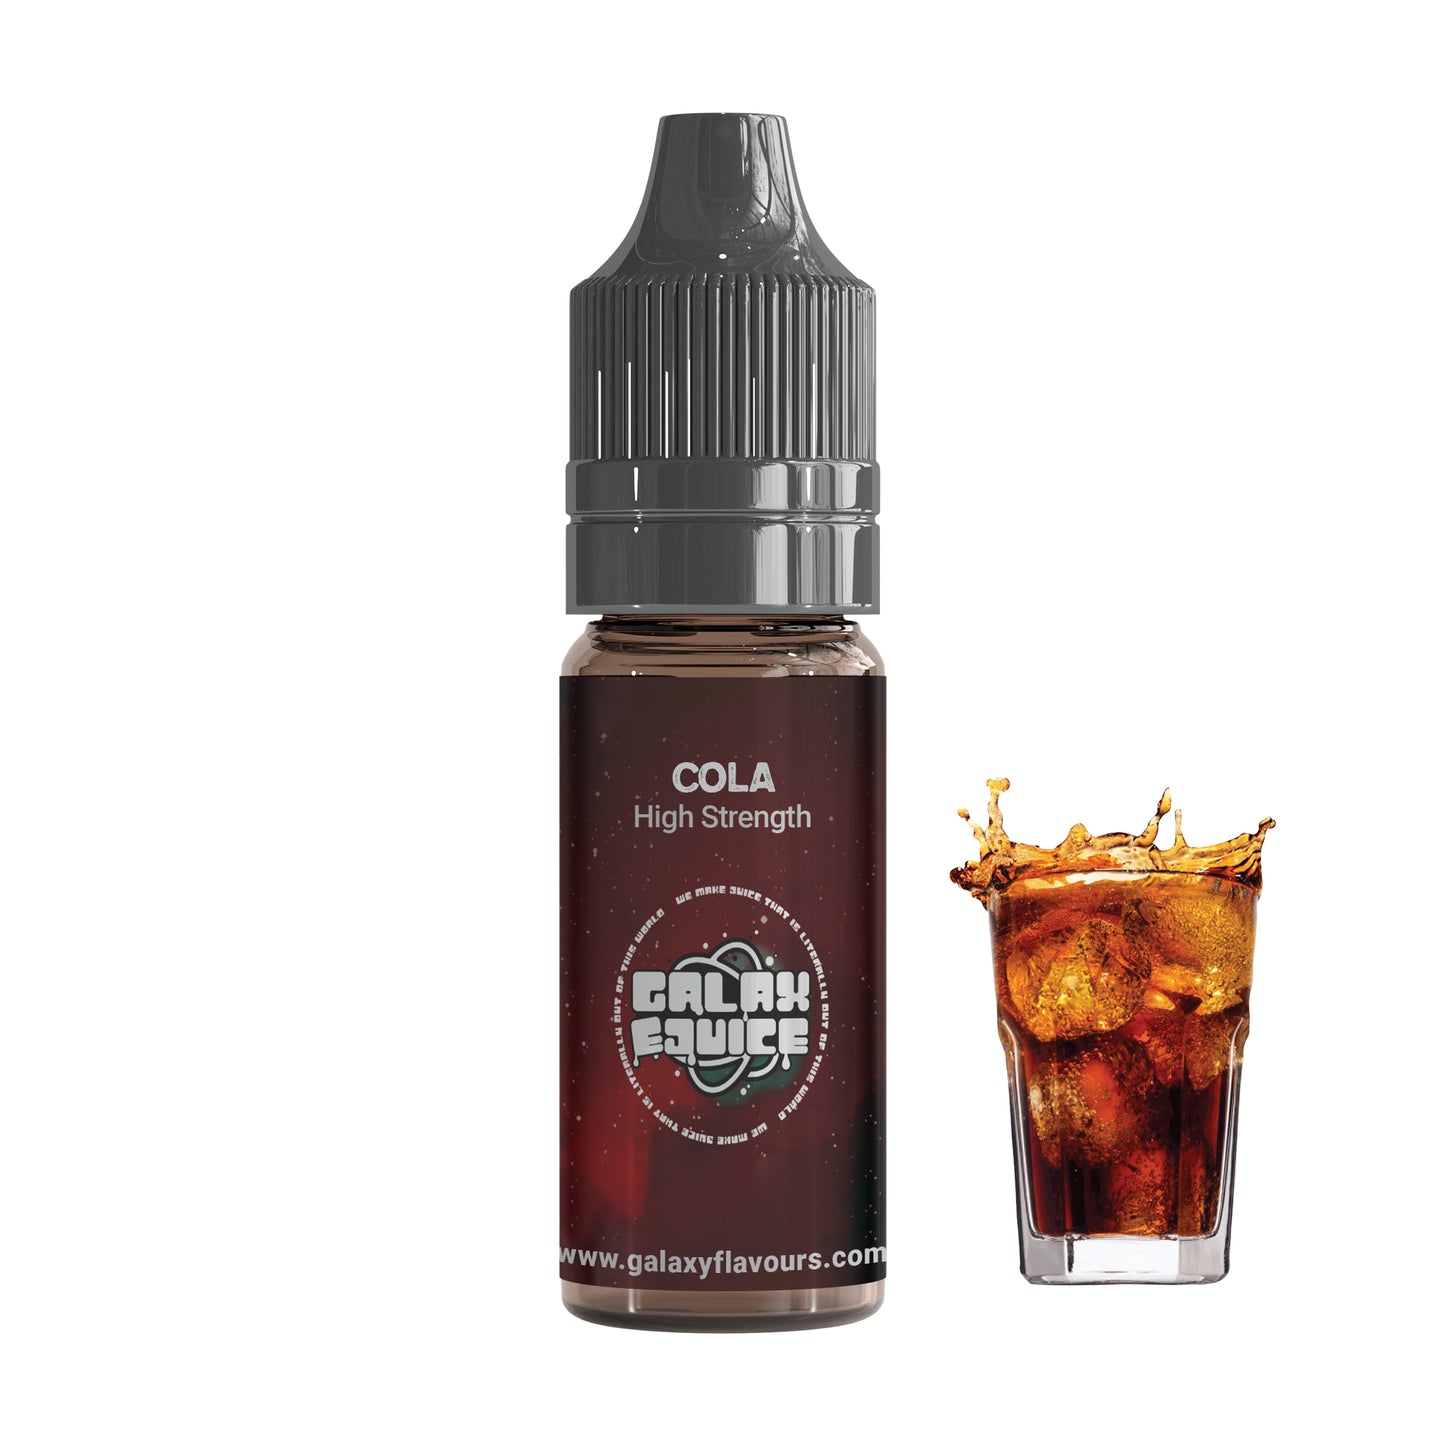 Cola High Strength Professional Flavouring.